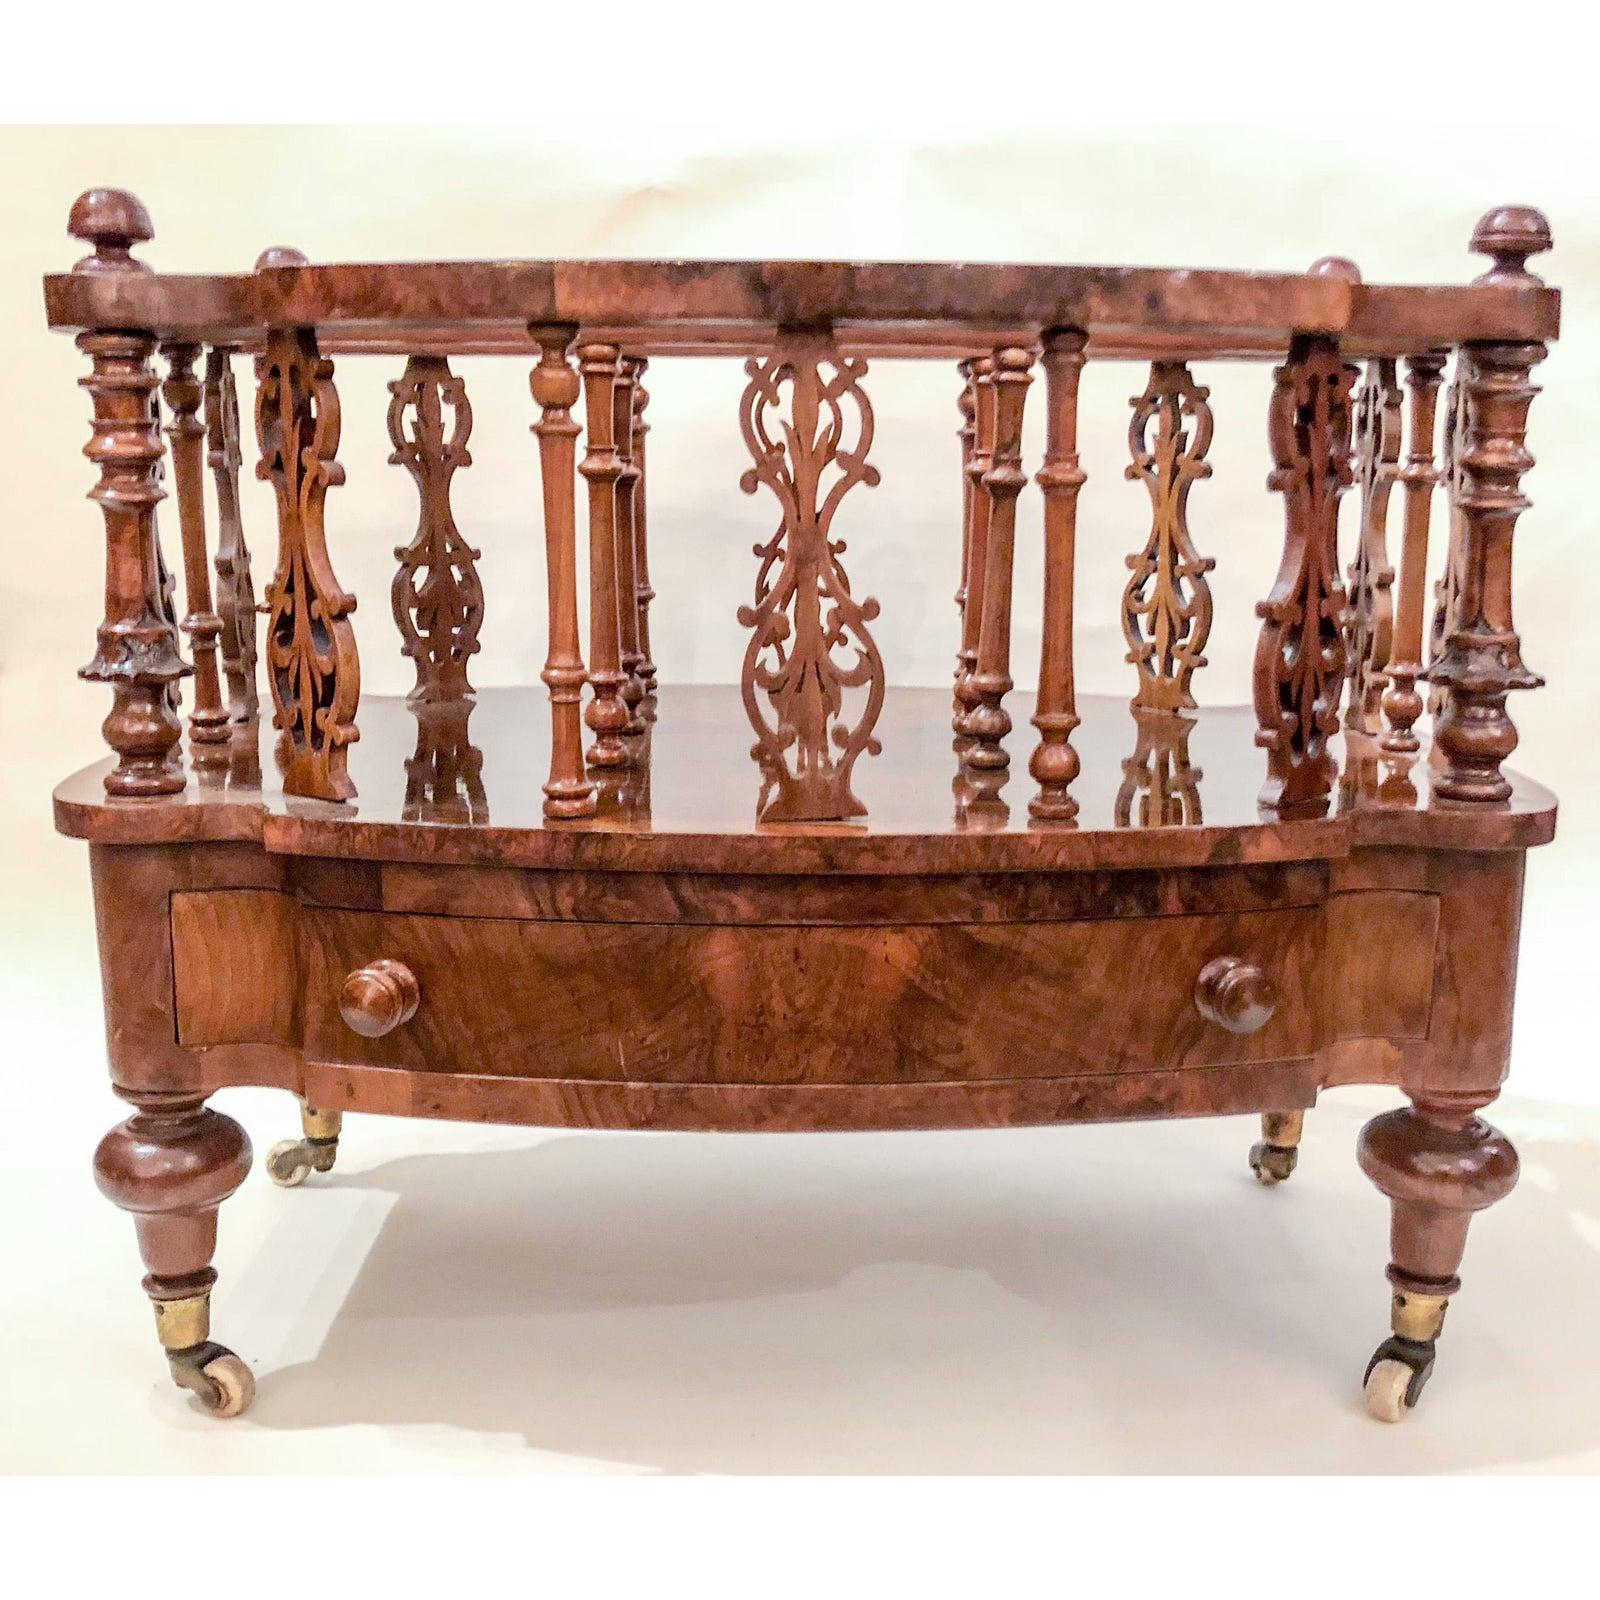 Antique English 19th century burled walnut canterbury. The burl is exceedingly beautiful on this piece.
 